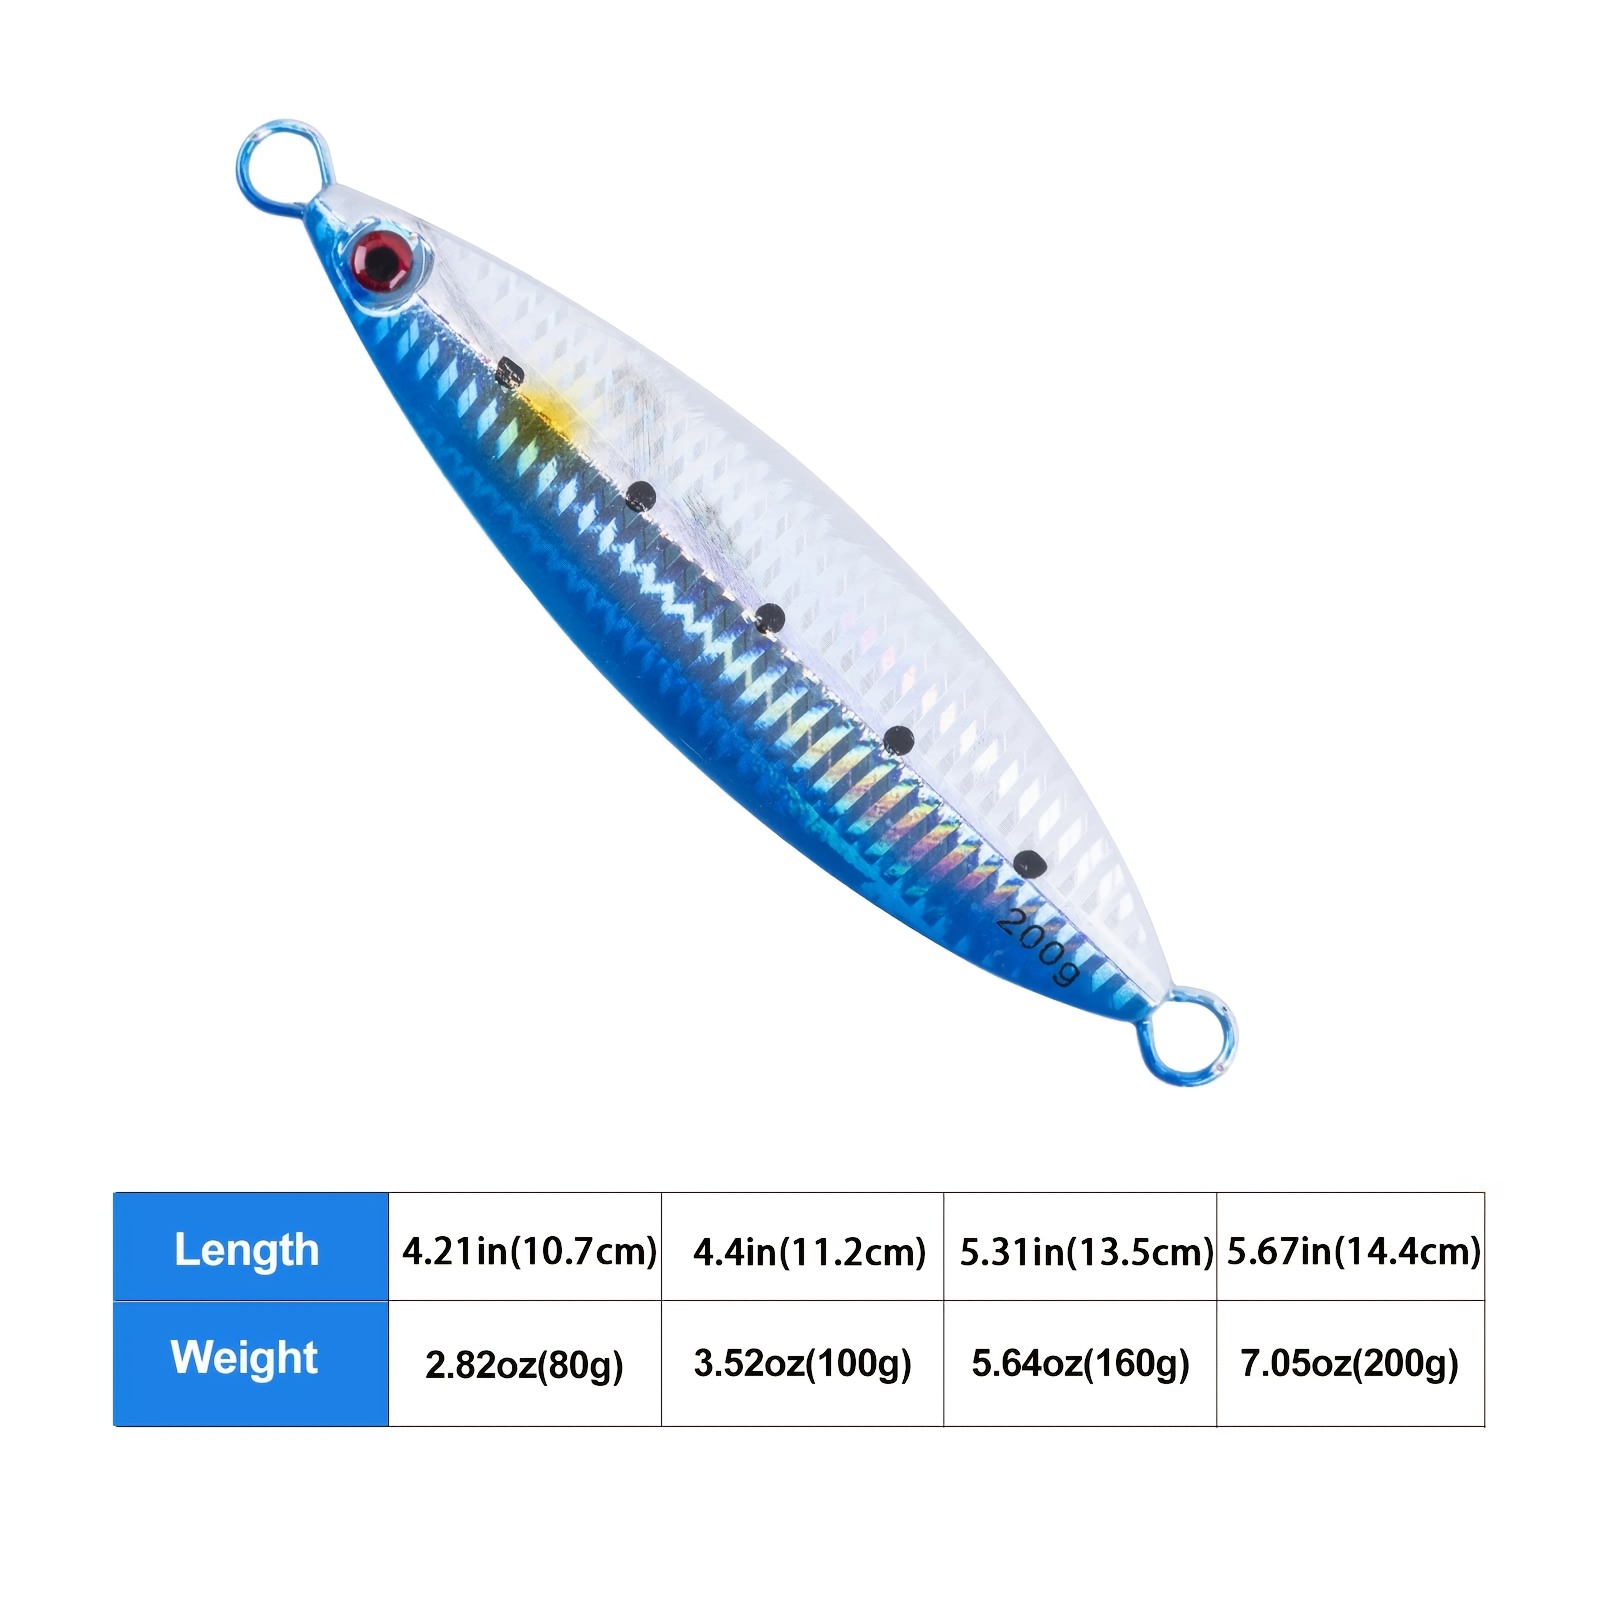 SOLARIS - Slow pitch jigging lure 200 grams - Red head/Black  [SOLARIS-200-FR (CHINA)] - $13.50 CAD : PECHE SUD, Saltwater fishing  tackles, jigging lures, reels, rods